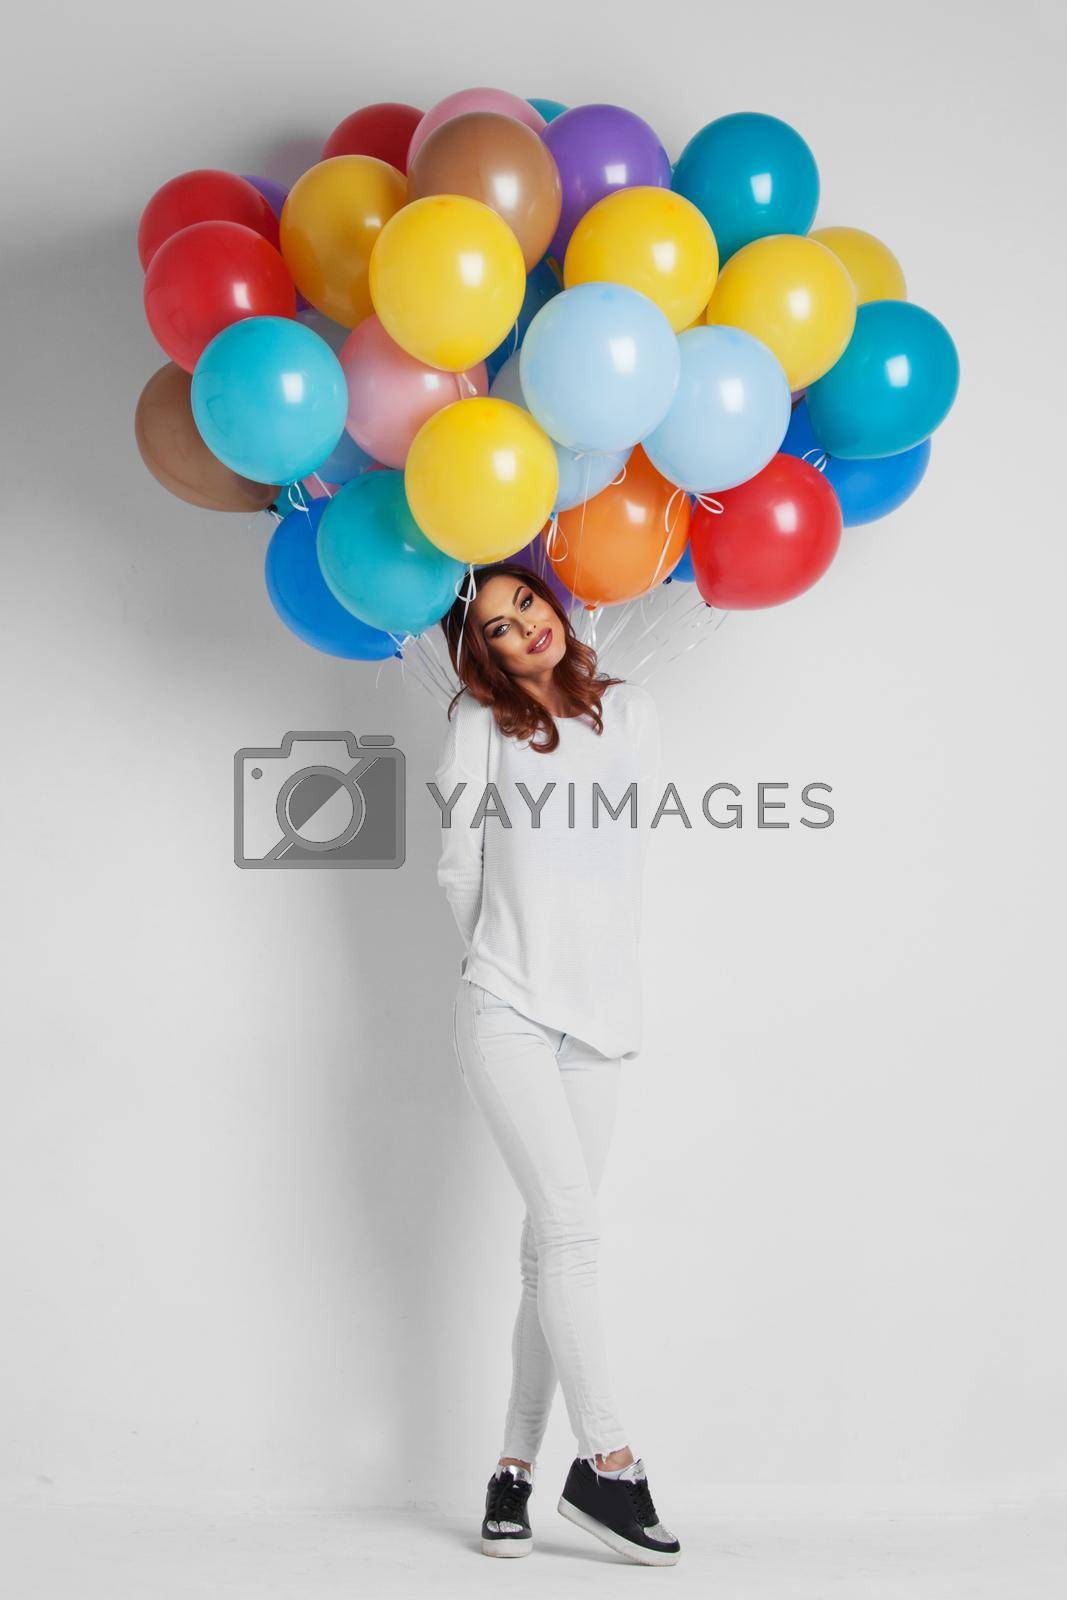 Royalty free image of Happy woman holding balloons by Yellowj